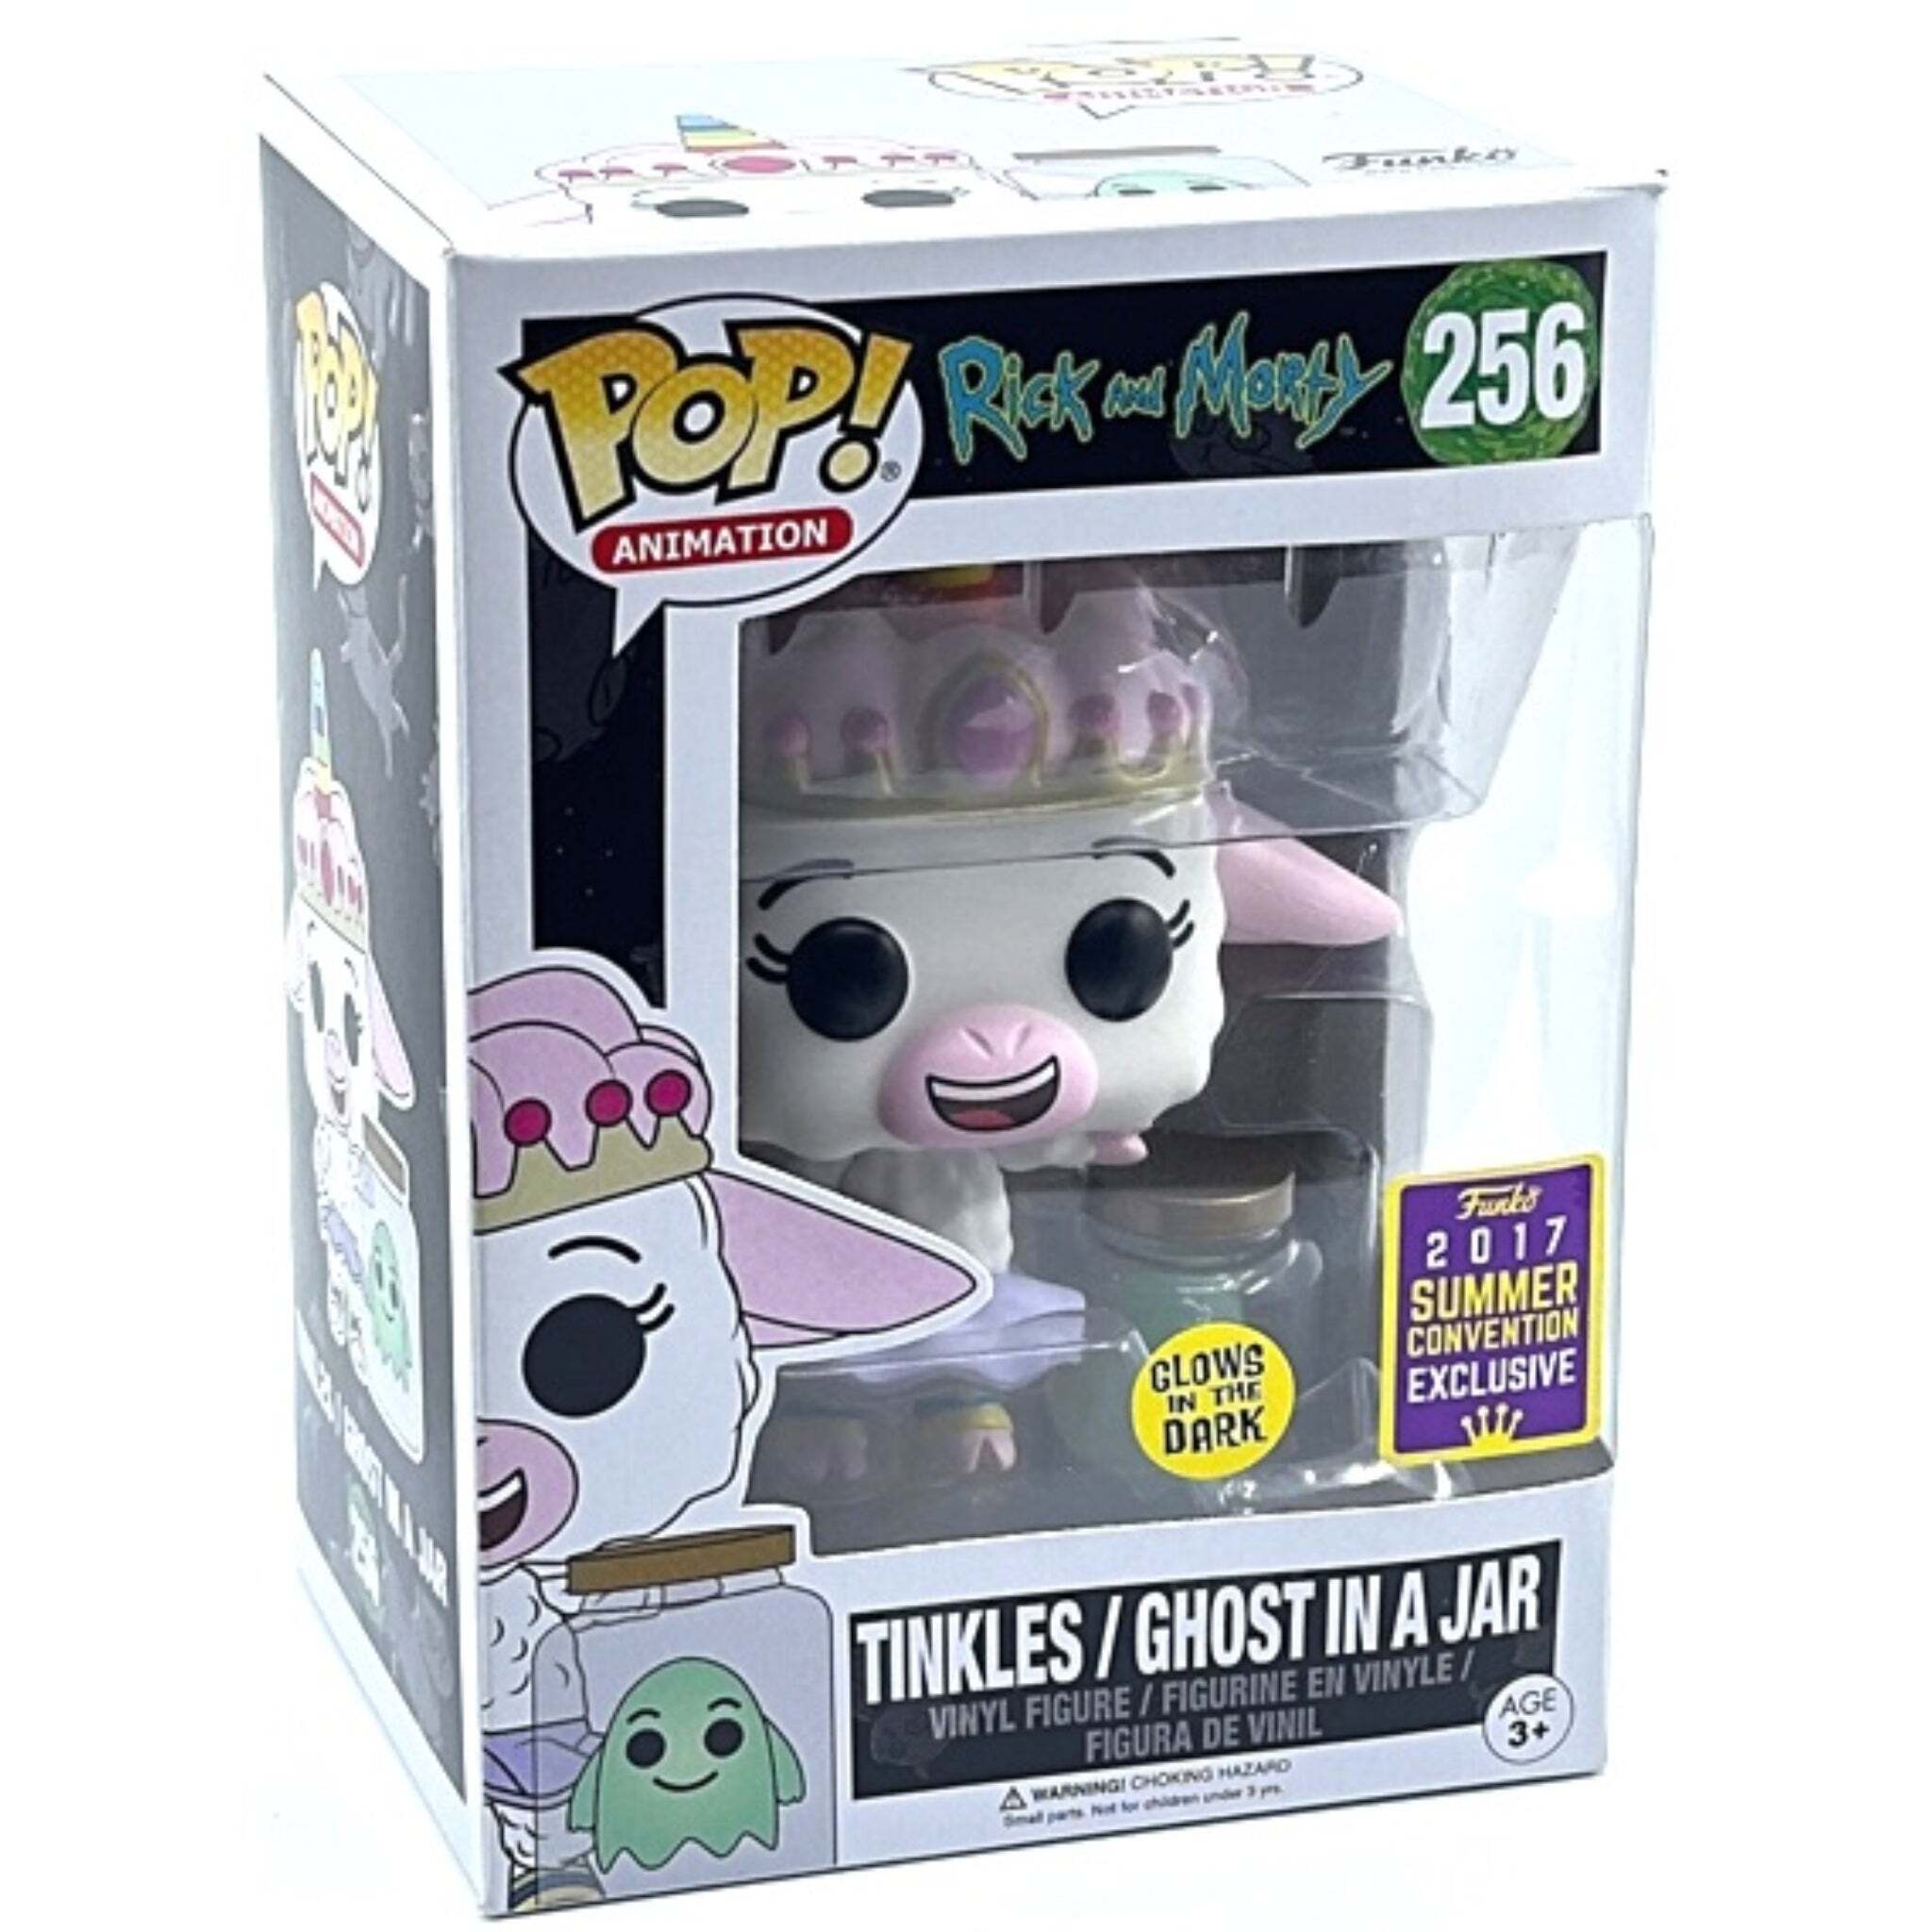 Tinkles / Ghost in a Jar Funko Pop! 2017 SUMMER CON